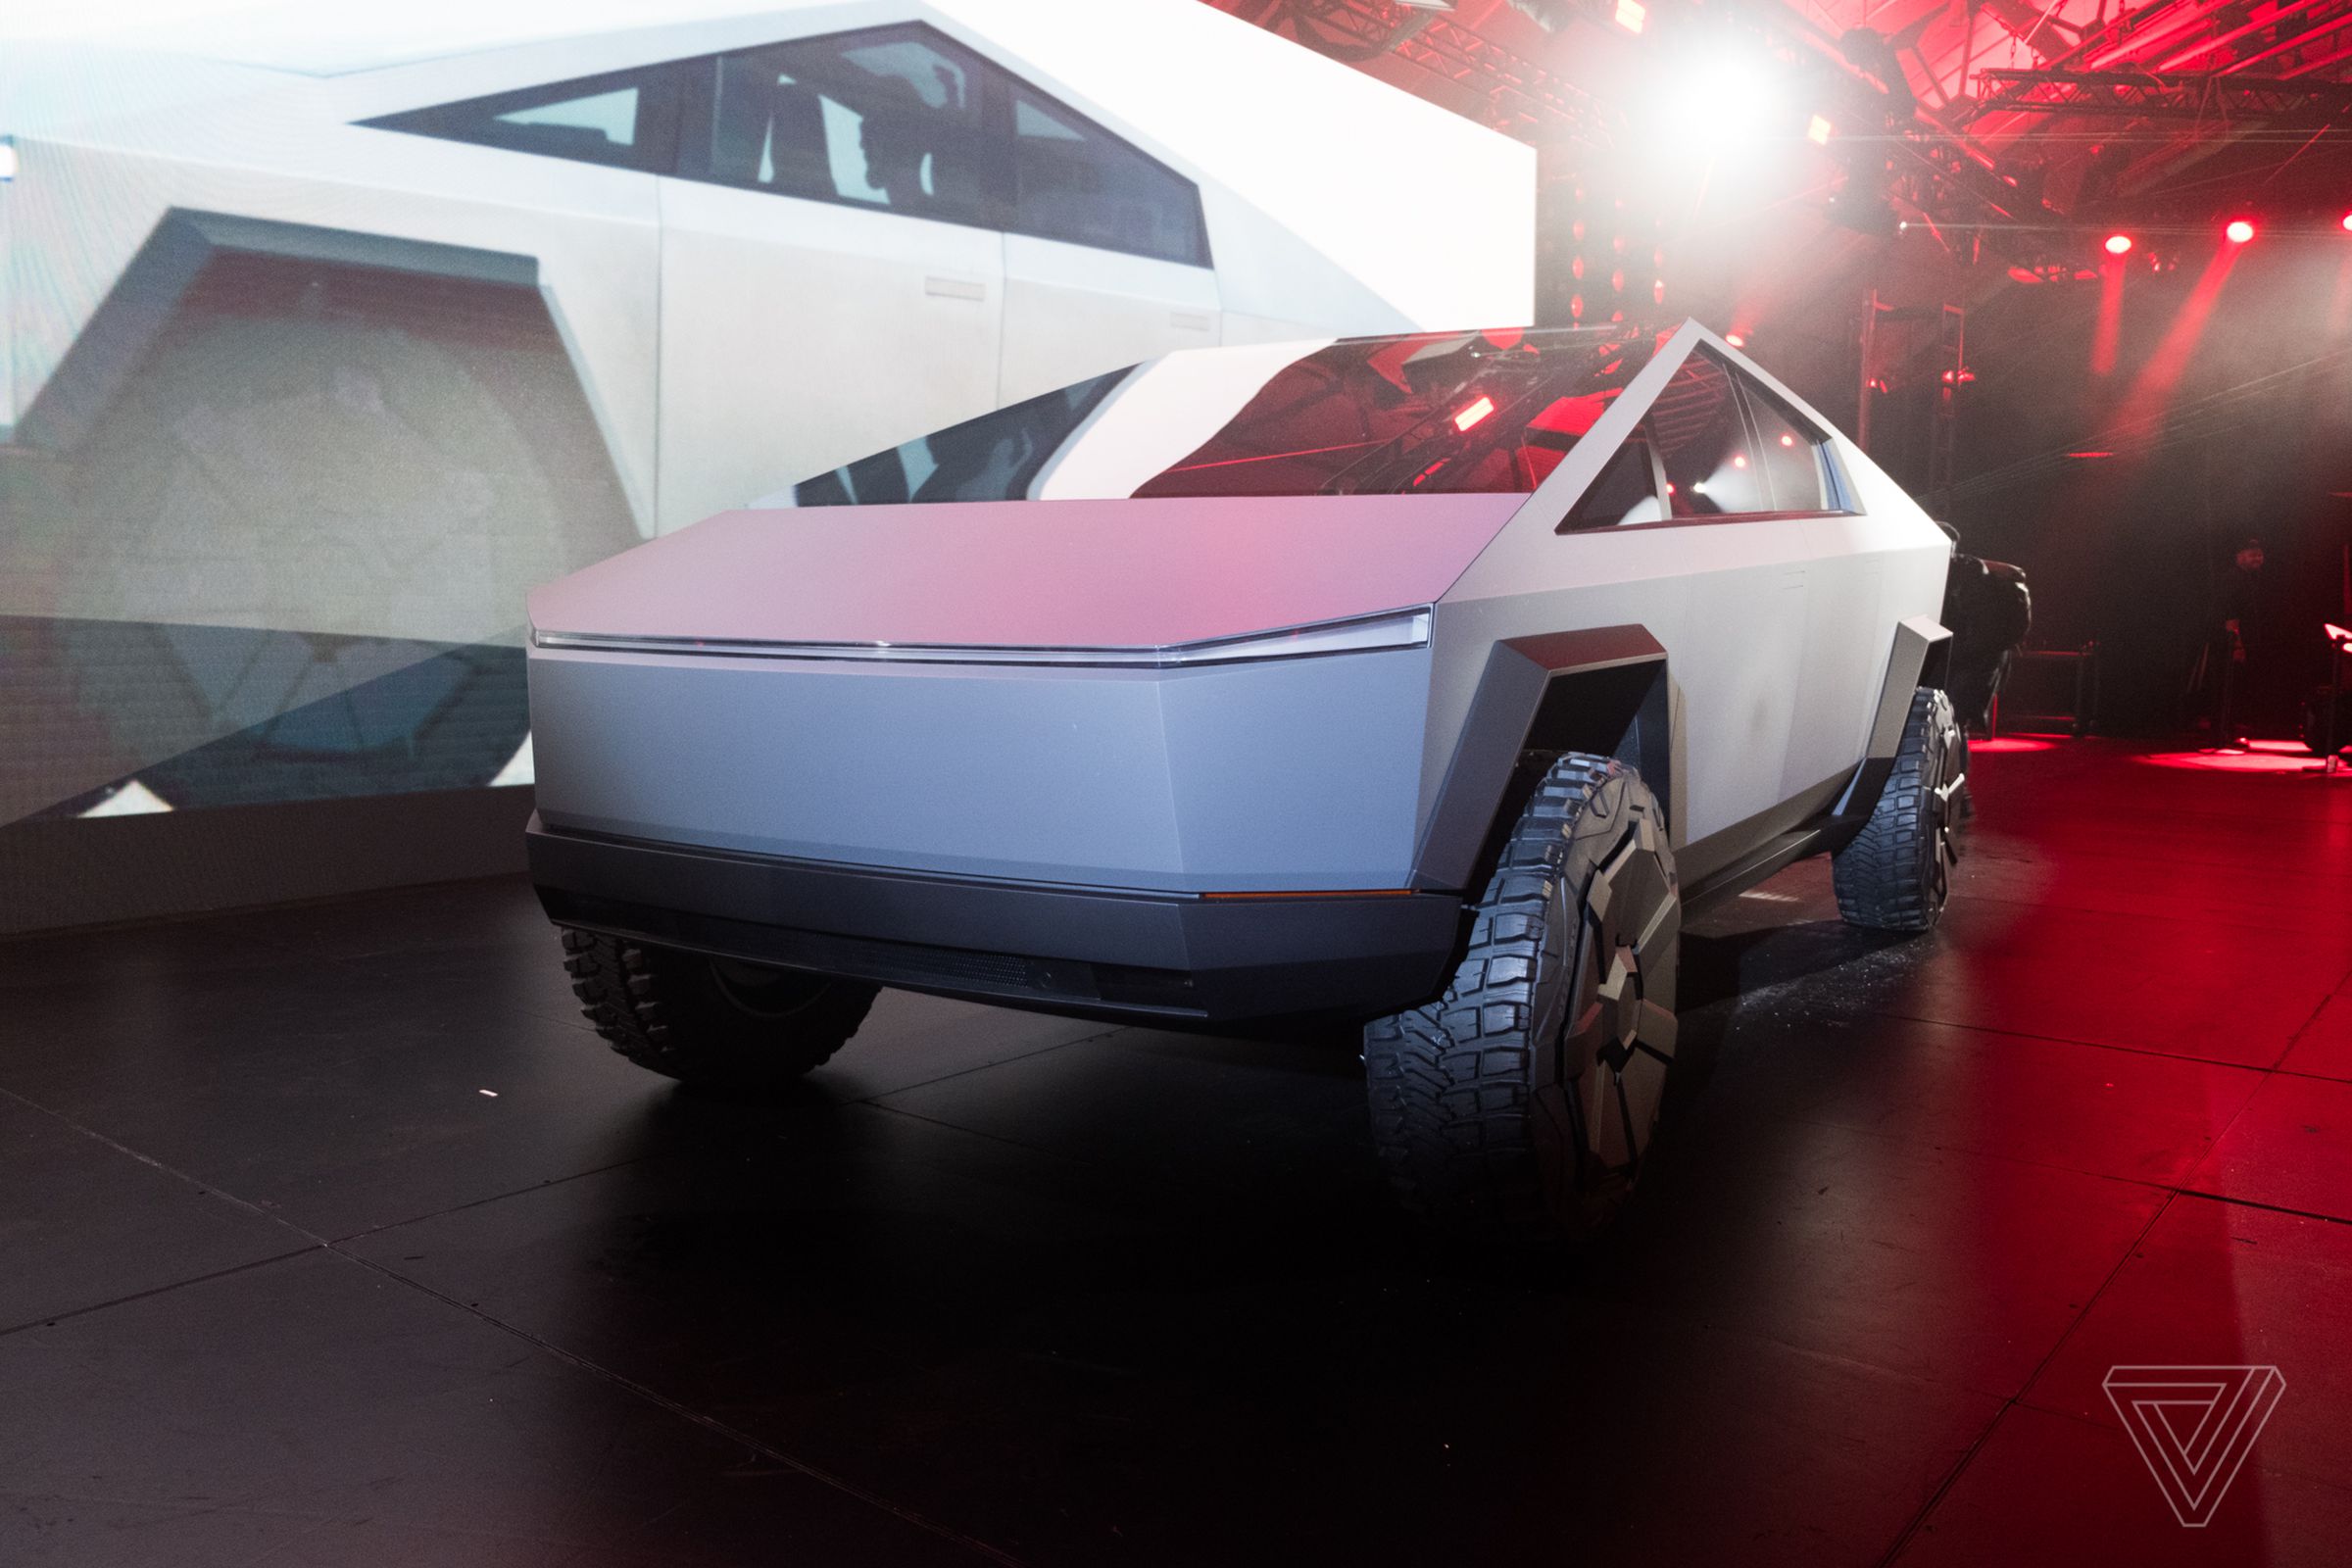 Tesla Cybertruck prototype in 2019, sitting on a stage in front of a massive projection screen.